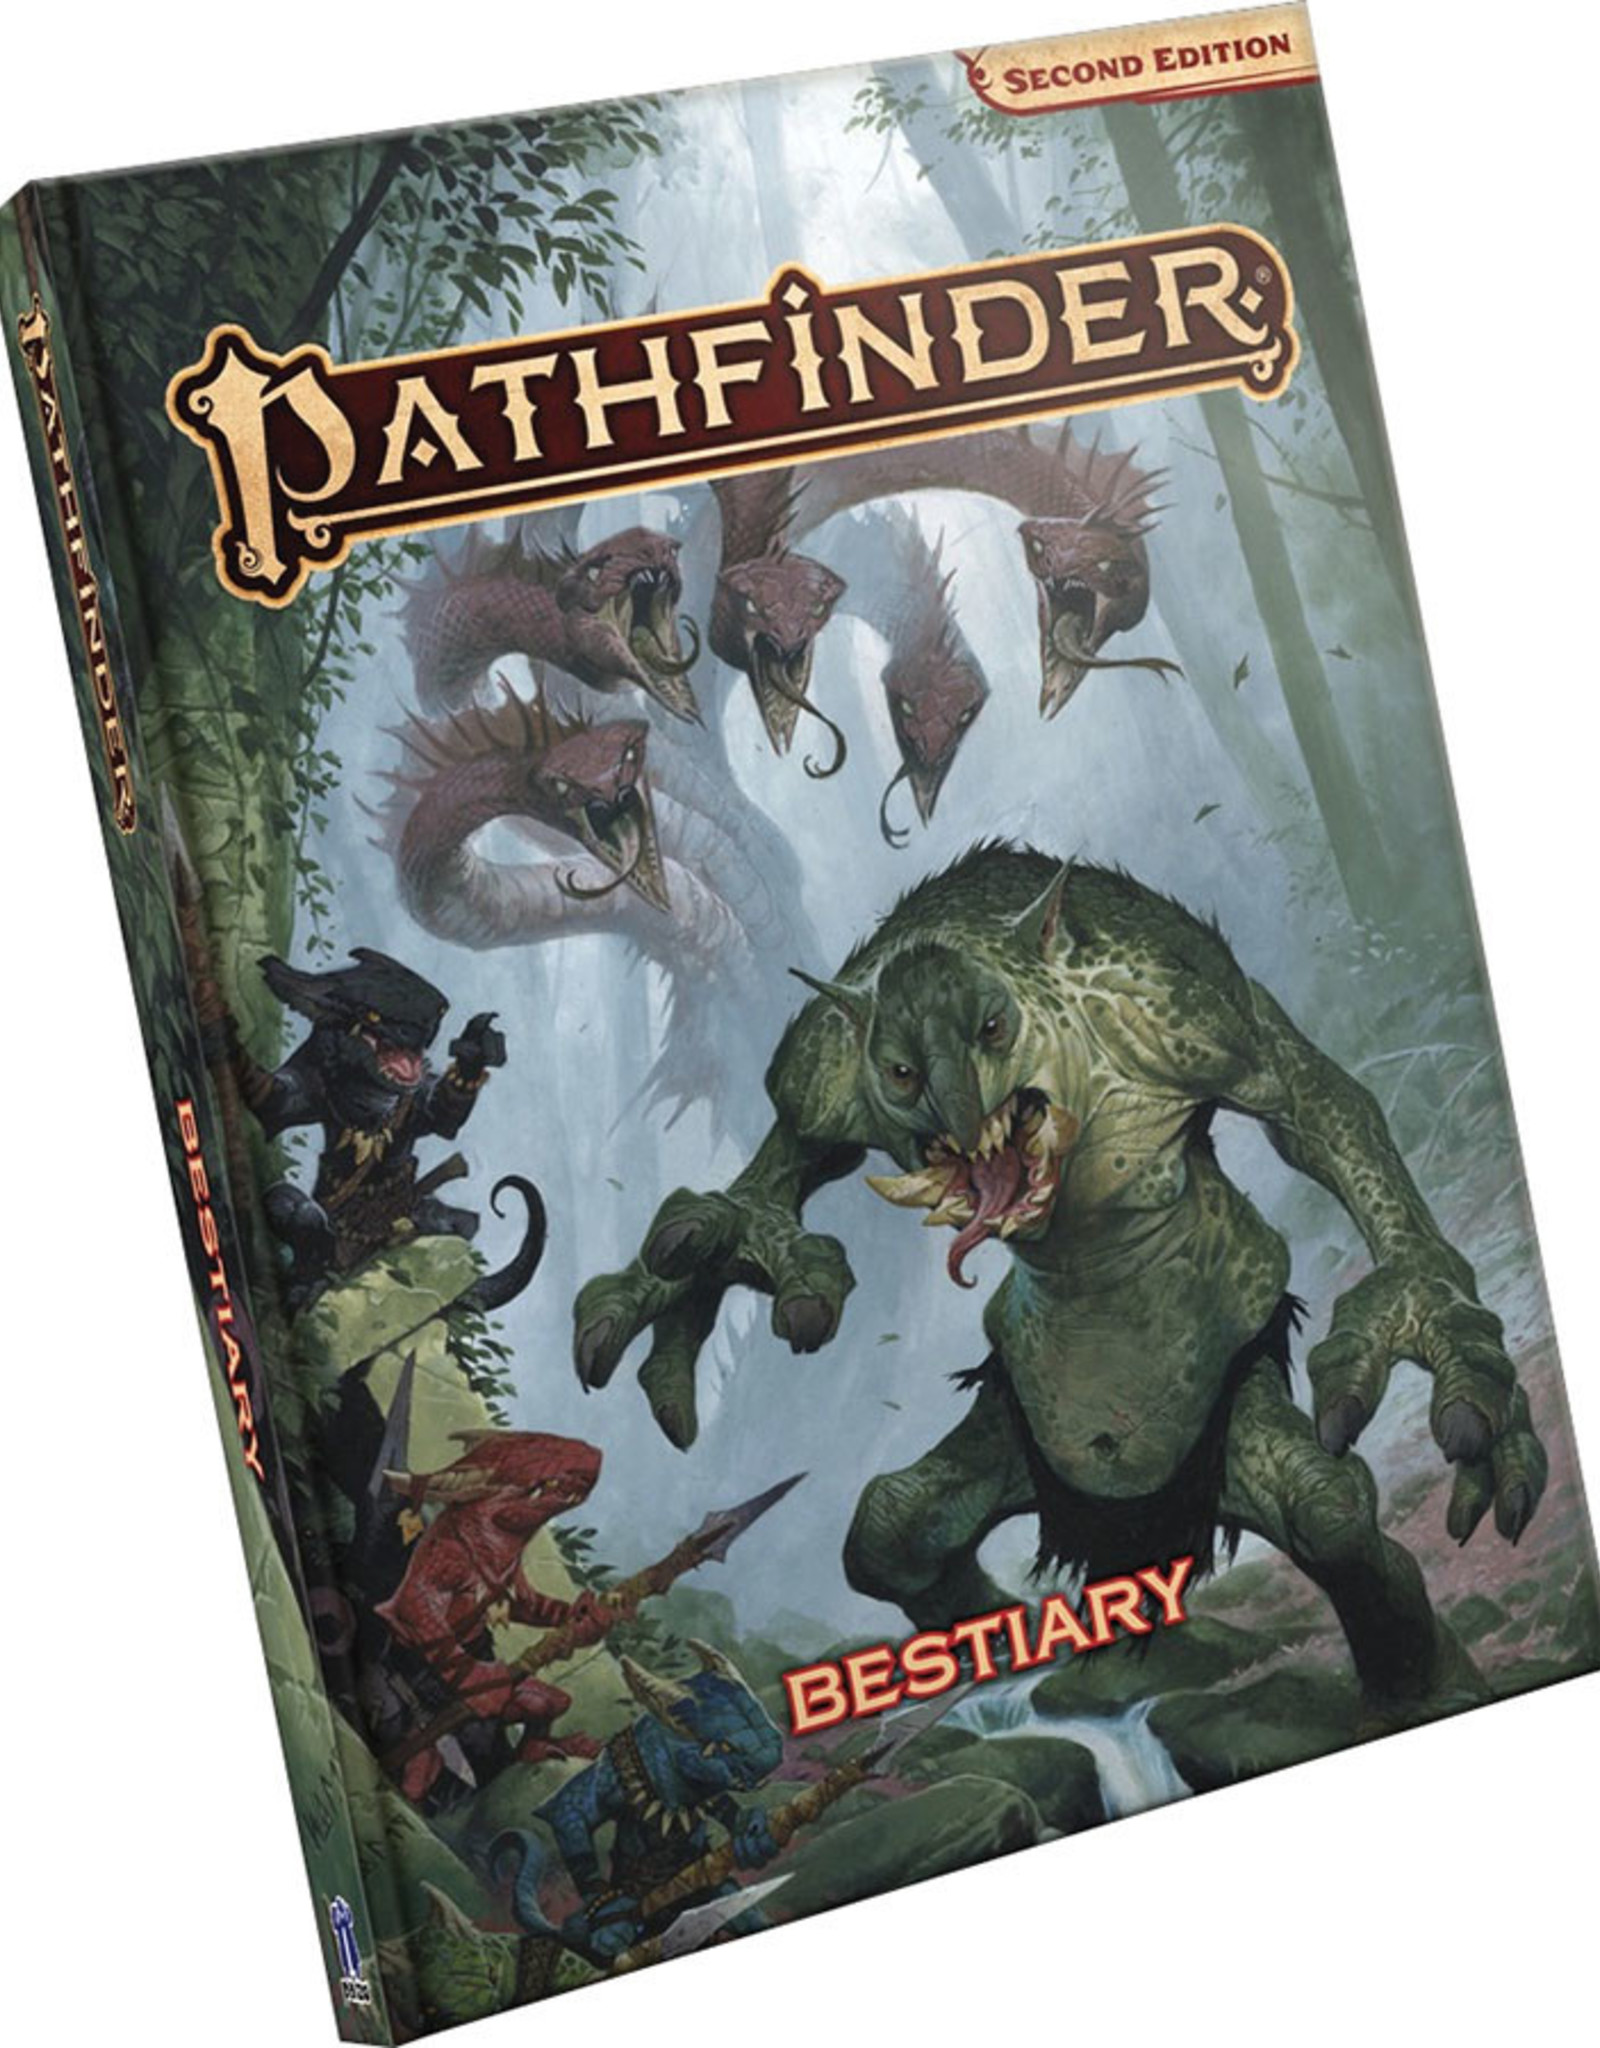 Pathfinder RPG Second Edition - Bestiary